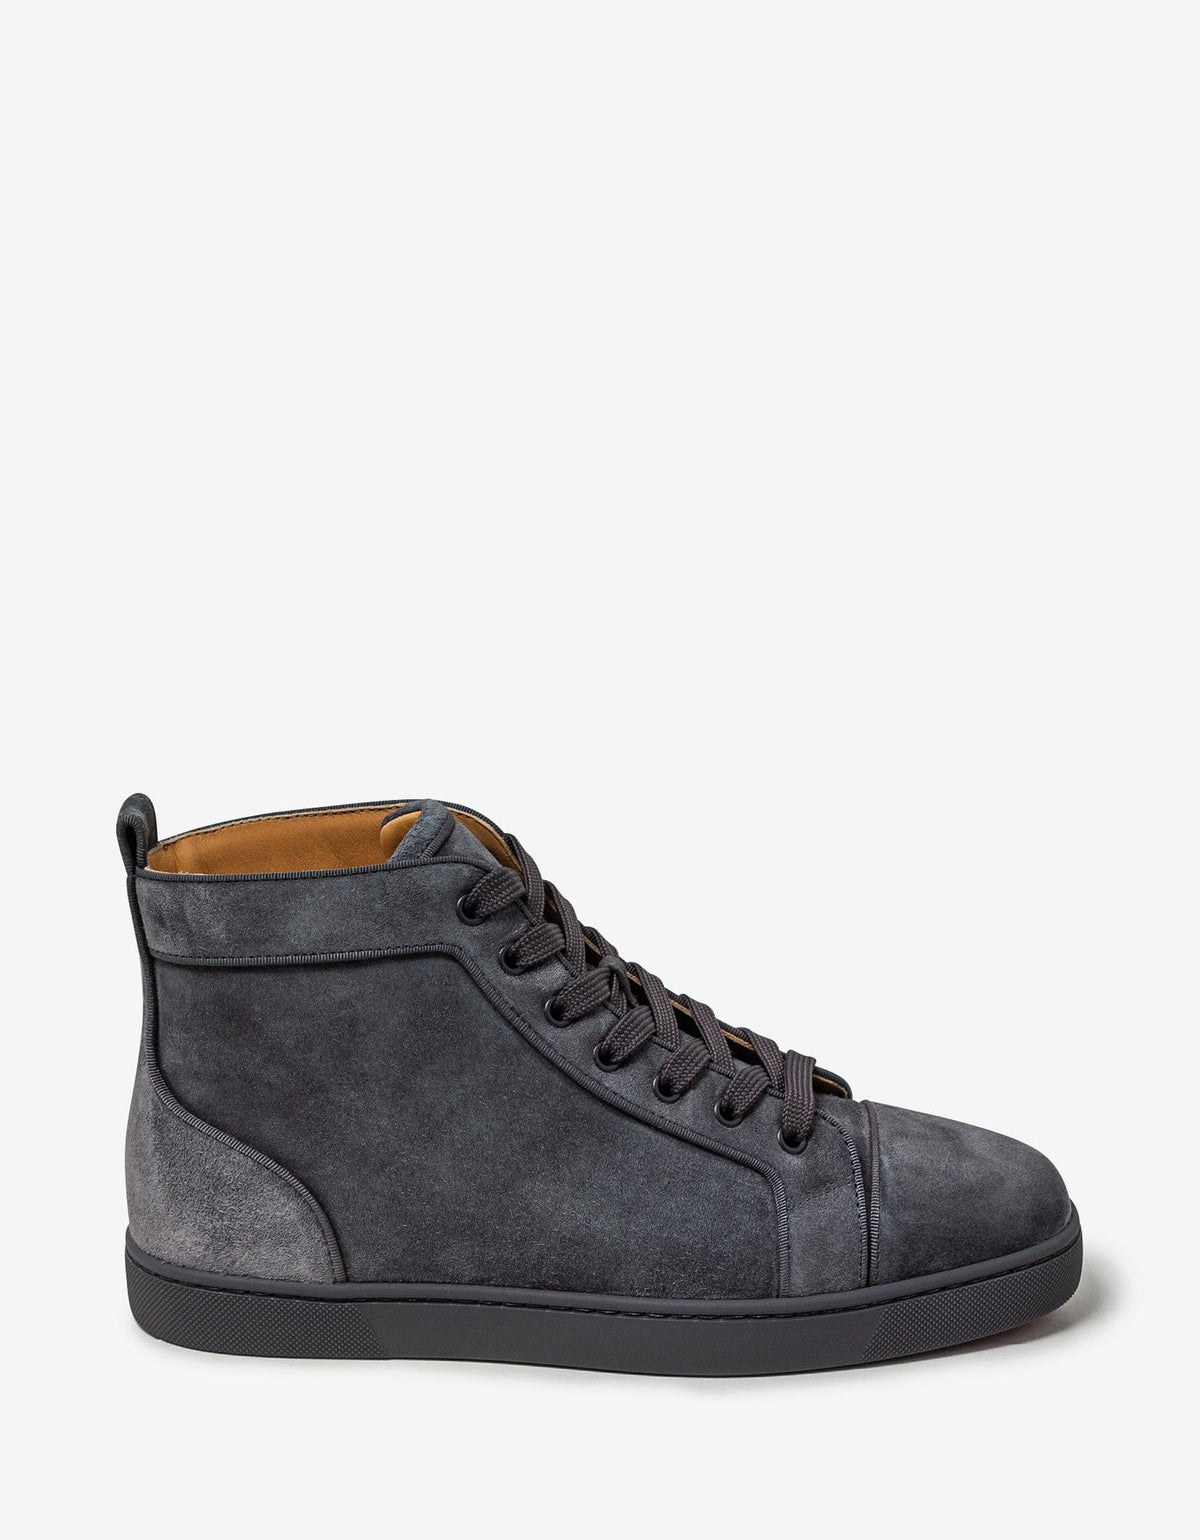 Christian Louboutin Louis Orlato Flat Grey Suede High Top Trainers